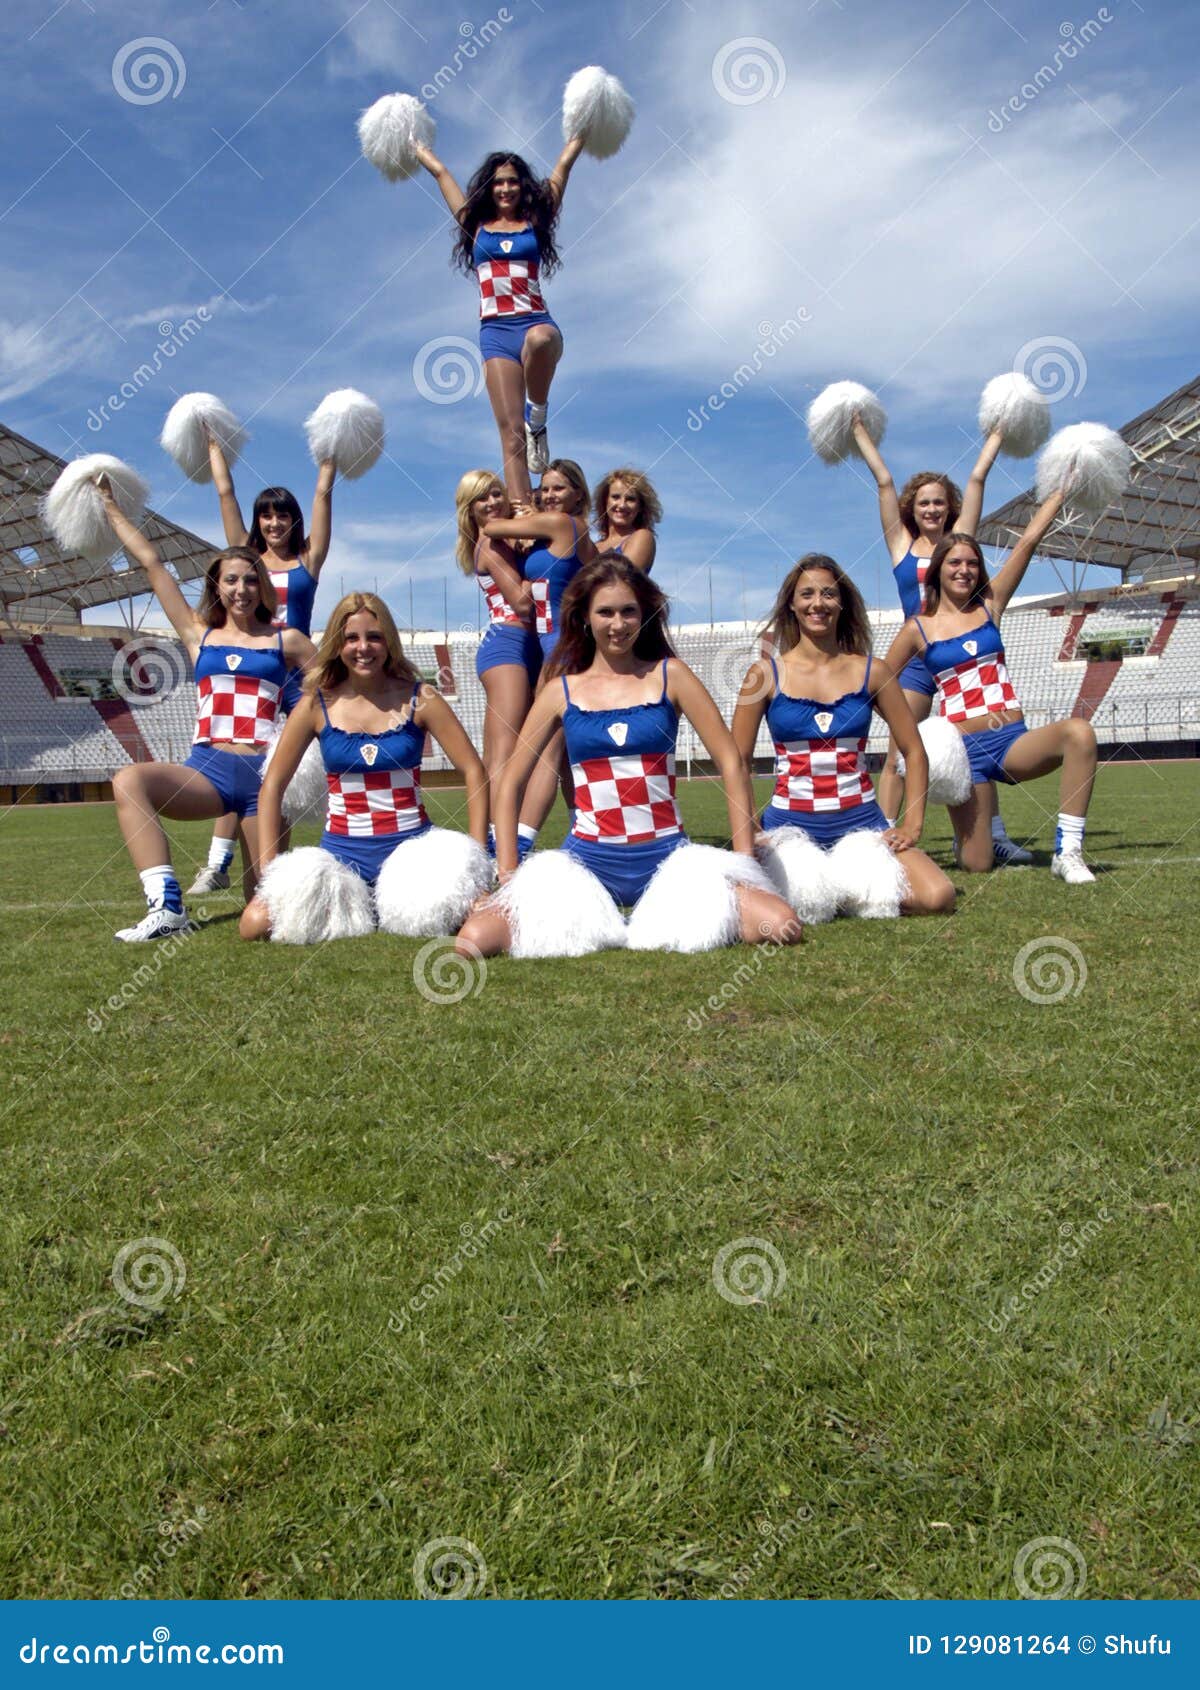 Cheerleaders Formation on the Grass Editorial Stock Image - Image of happy,  background: 129081264